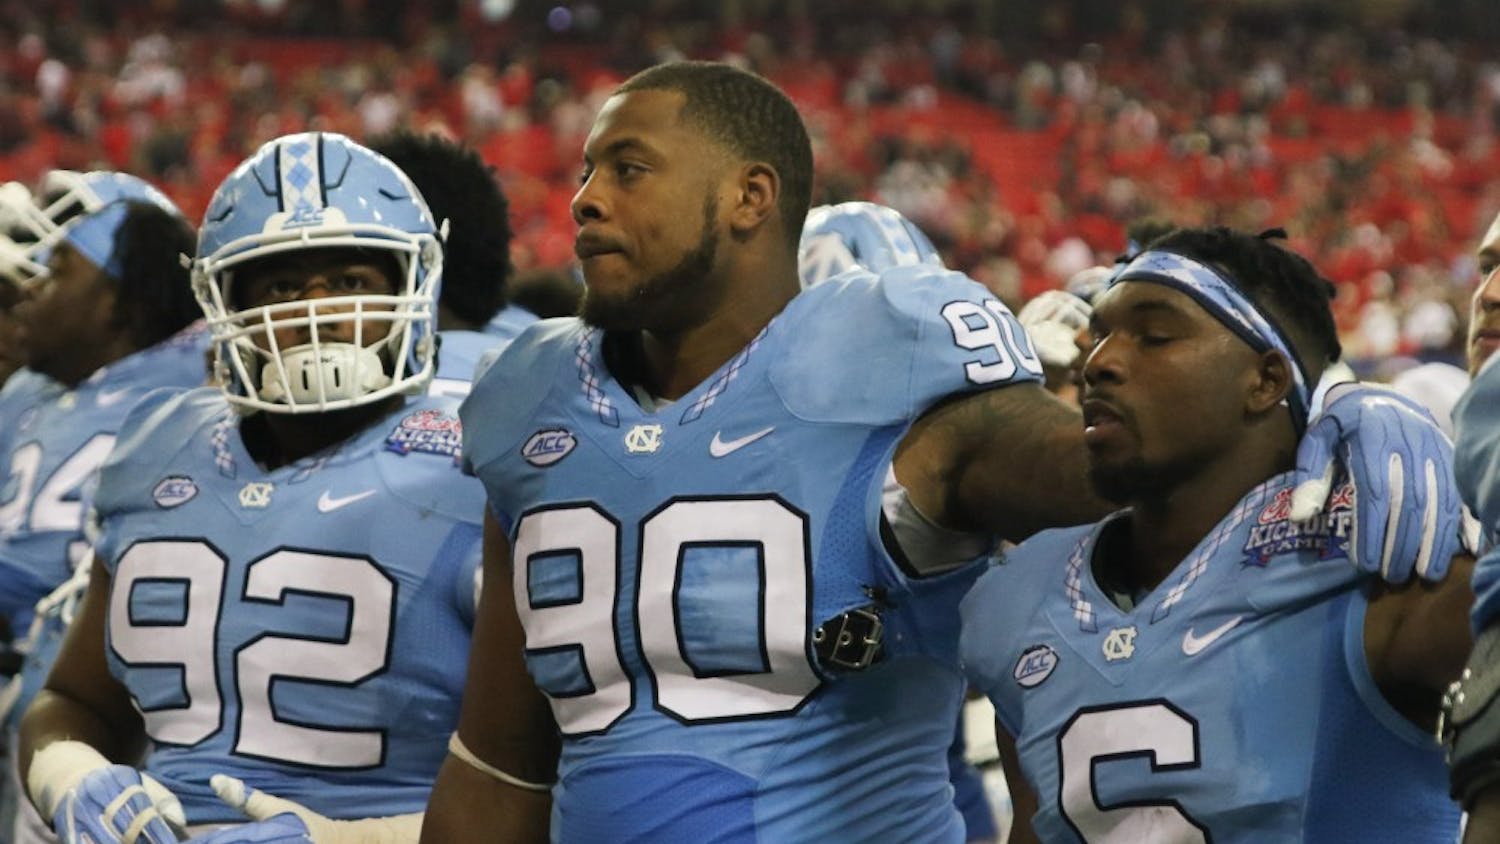 UNC defensive tackle Nazair Jones (90), and cornerback MJ stewart (6) show their disappointment after the team blows a ten point lead in the second half and falls to Georgia 33-24 in Atlanta on Saturday.